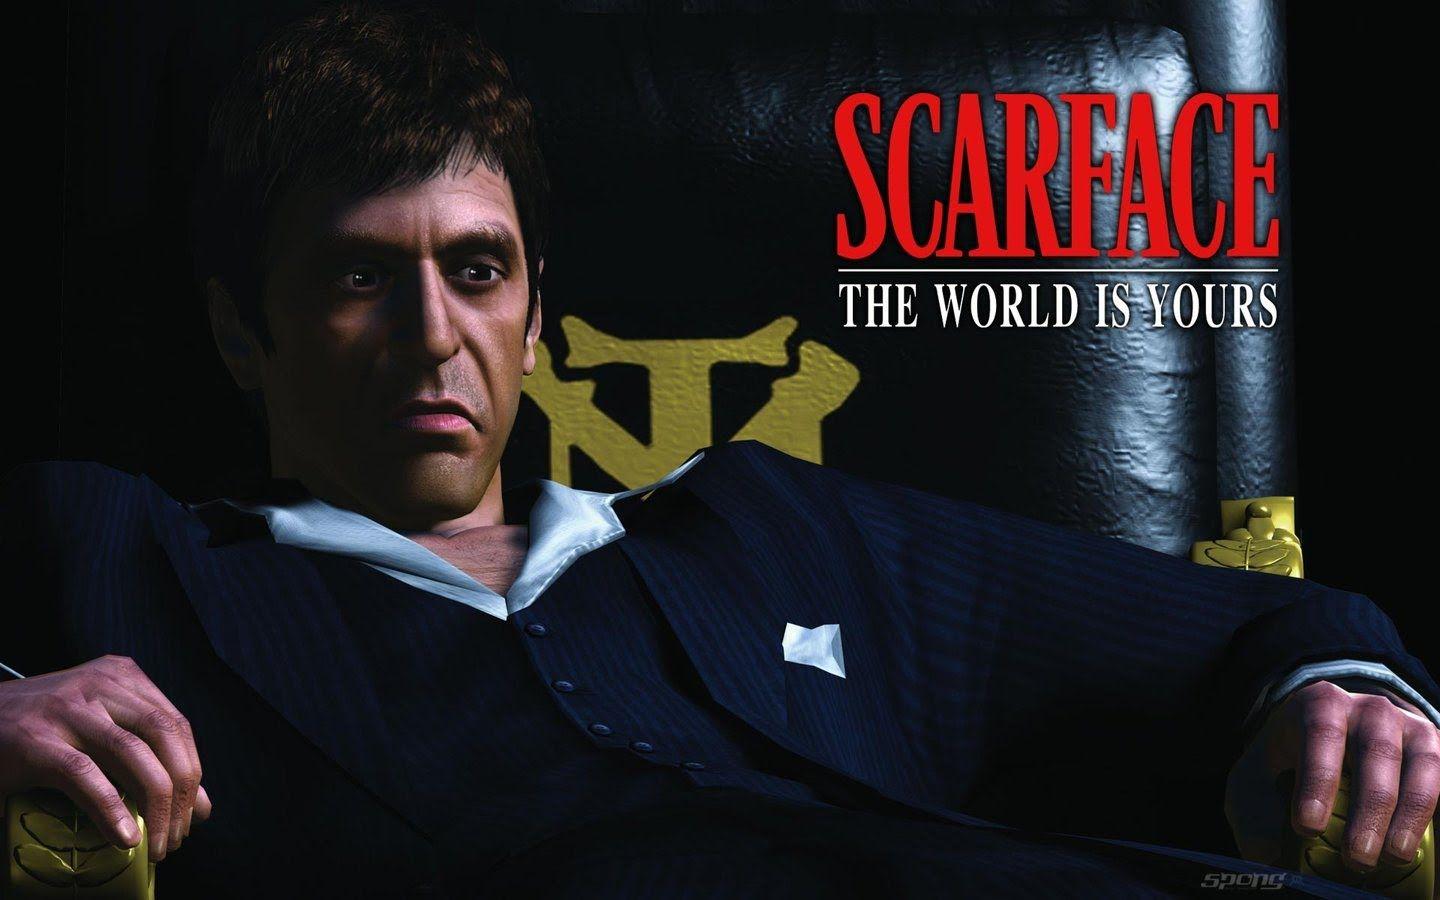 Scarface Wallpapers The World Is Yours - Wallpaper Cave